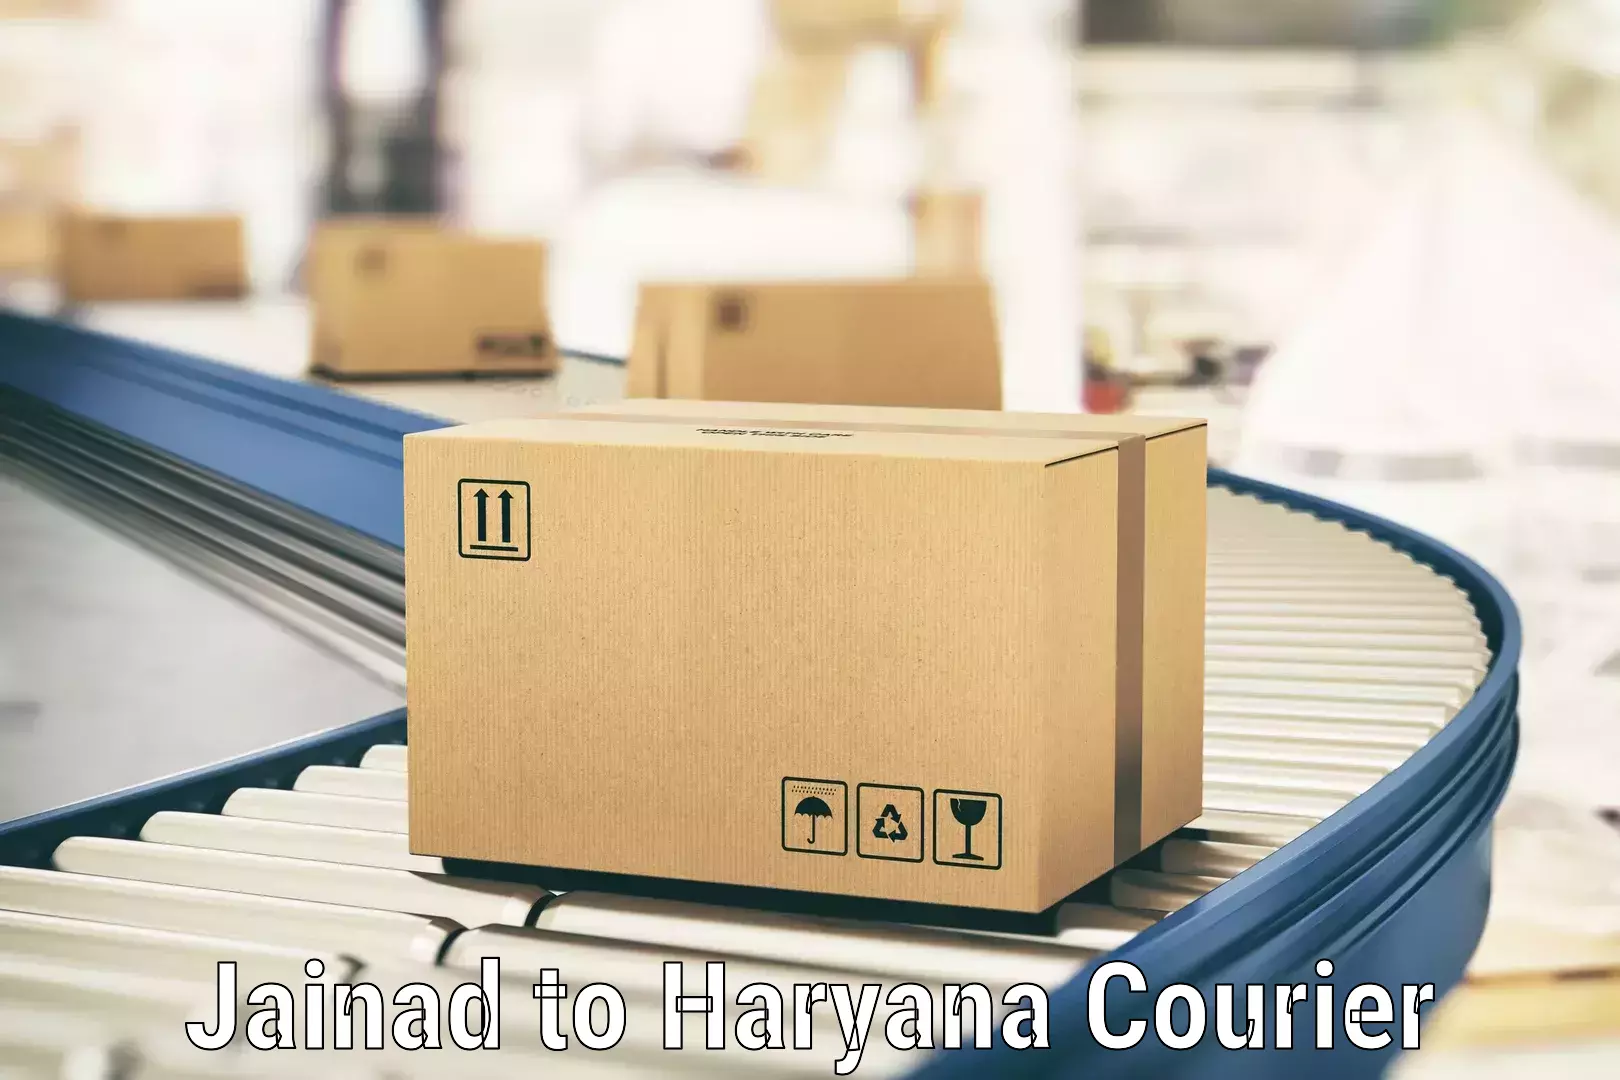 Easy access courier services Jainad to Odhan